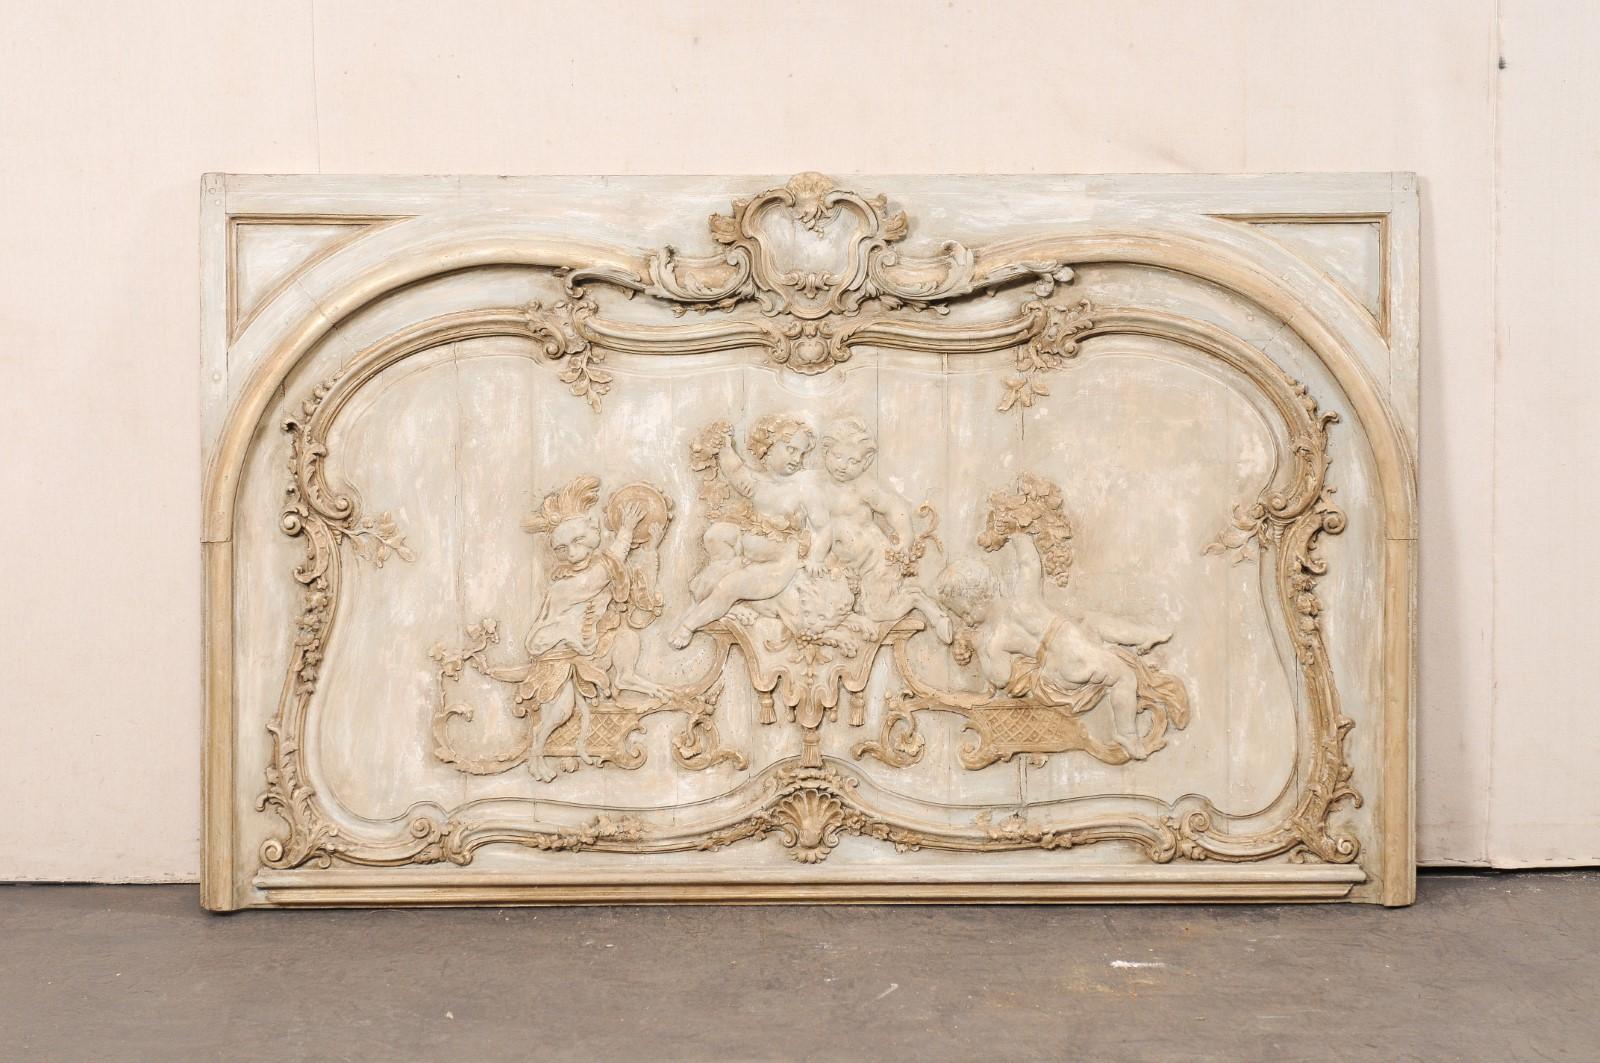 A large-sized French relief-carved and painted decorative wall panel from the 19th century. This antique plaque from France is rectangular-shaped with beautiful relief carvings depicting various putti at play alongside a monkey with tambourine and